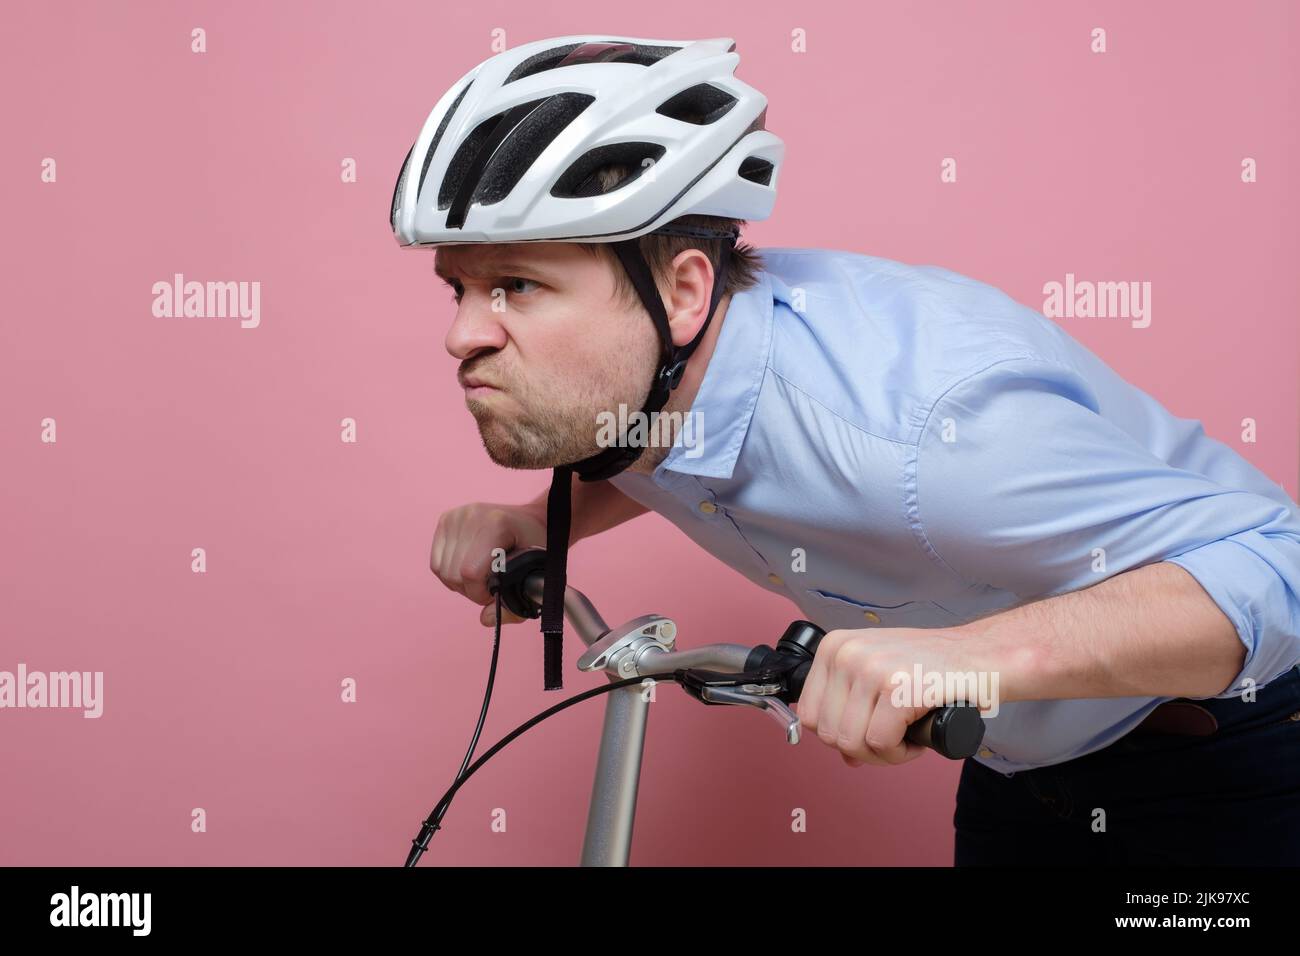 Confused caucasian man wearing on bike over colorful background Stock Photo